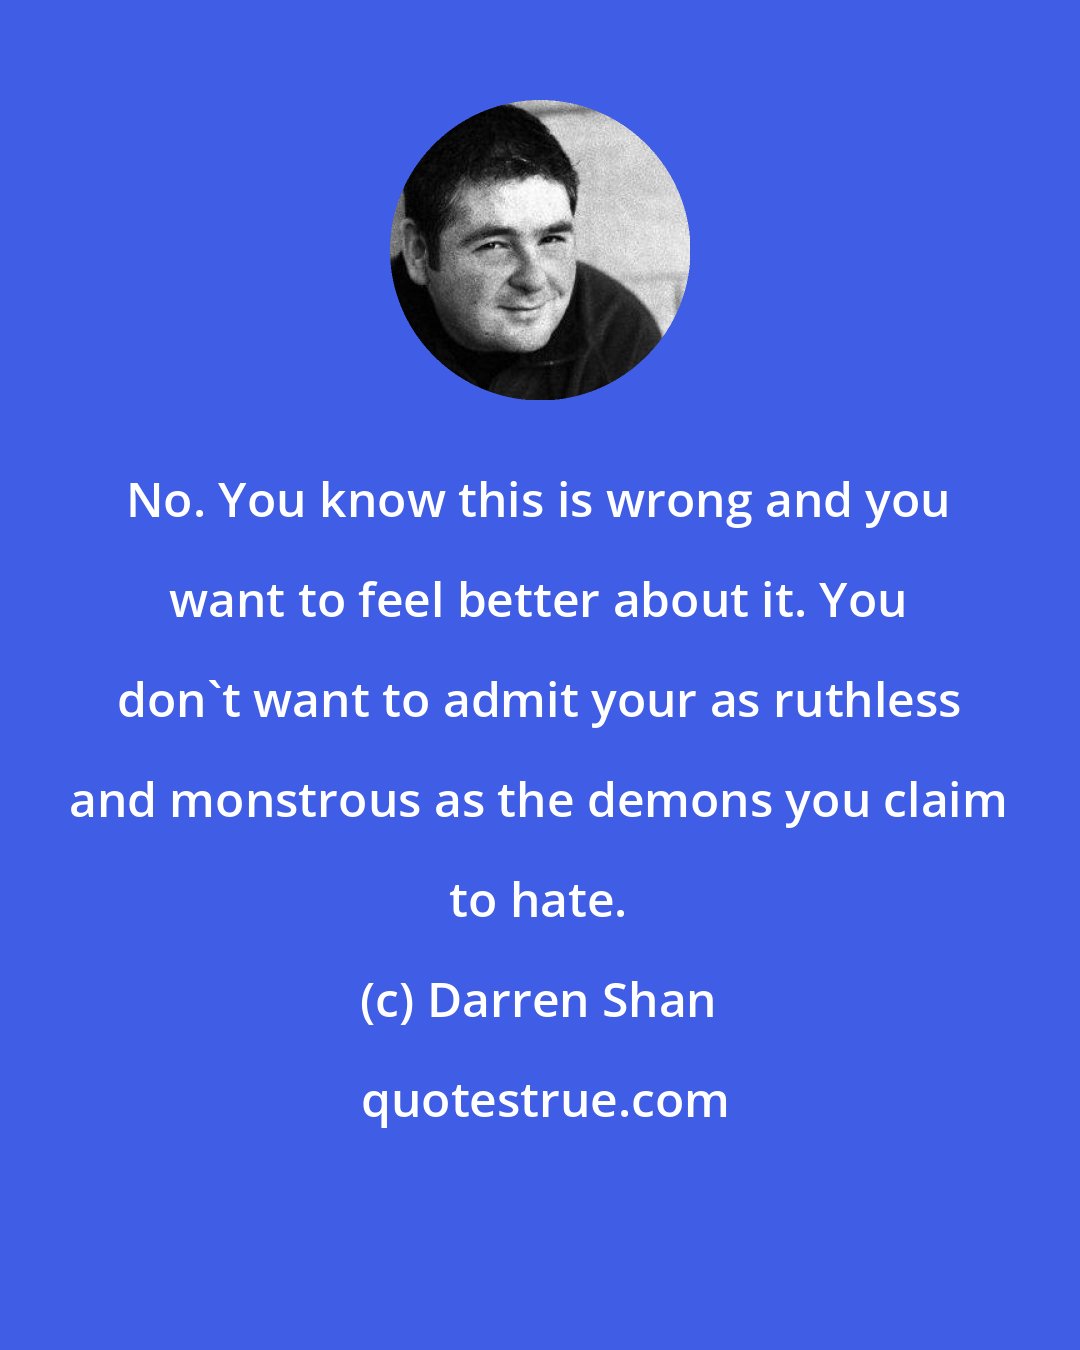 Darren Shan: No. You know this is wrong and you want to feel better about it. You don't want to admit your as ruthless and monstrous as the demons you claim to hate.